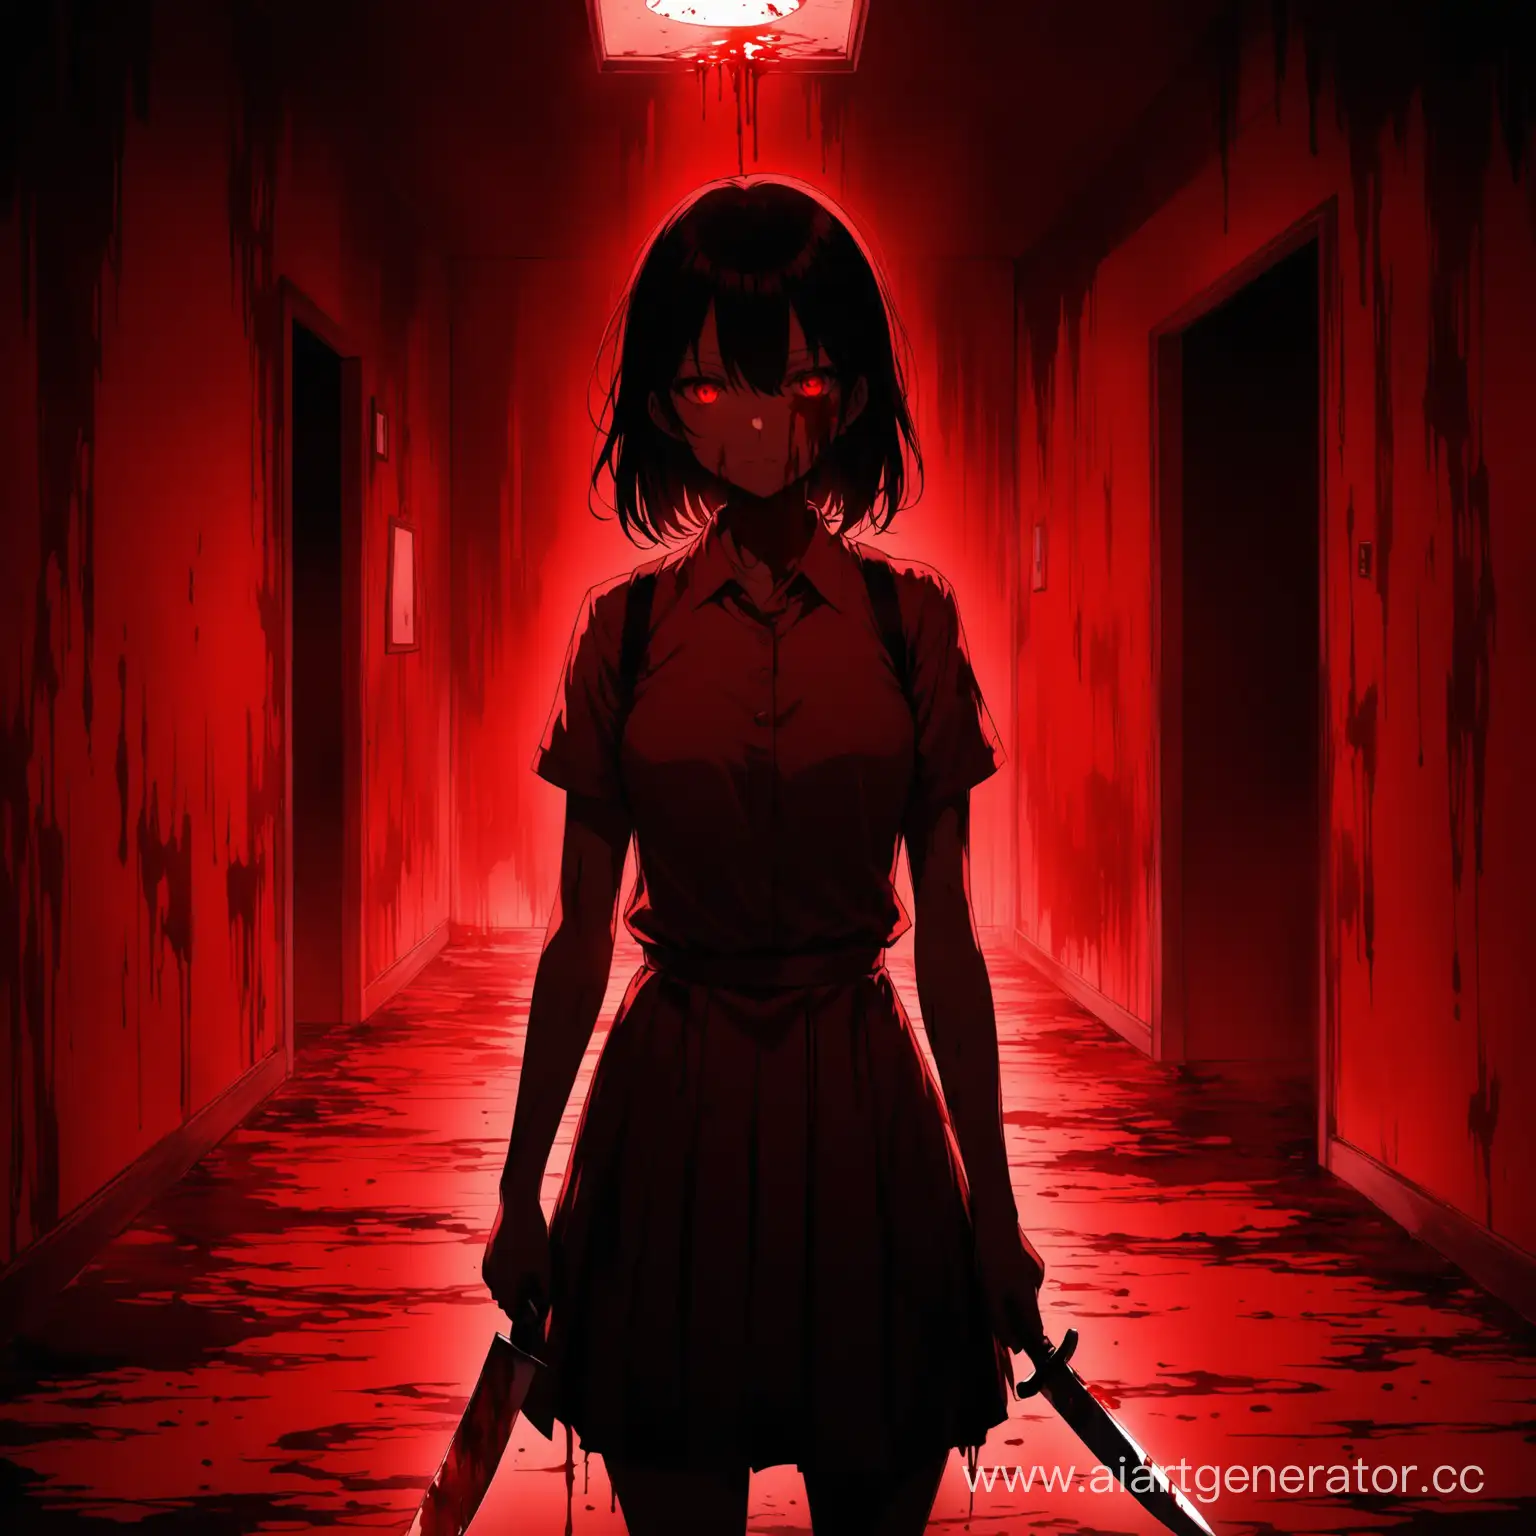 Anime-Girl-in-a-CrimsonStained-Room-with-Blood-Knife-and-Ominous-Red-Light